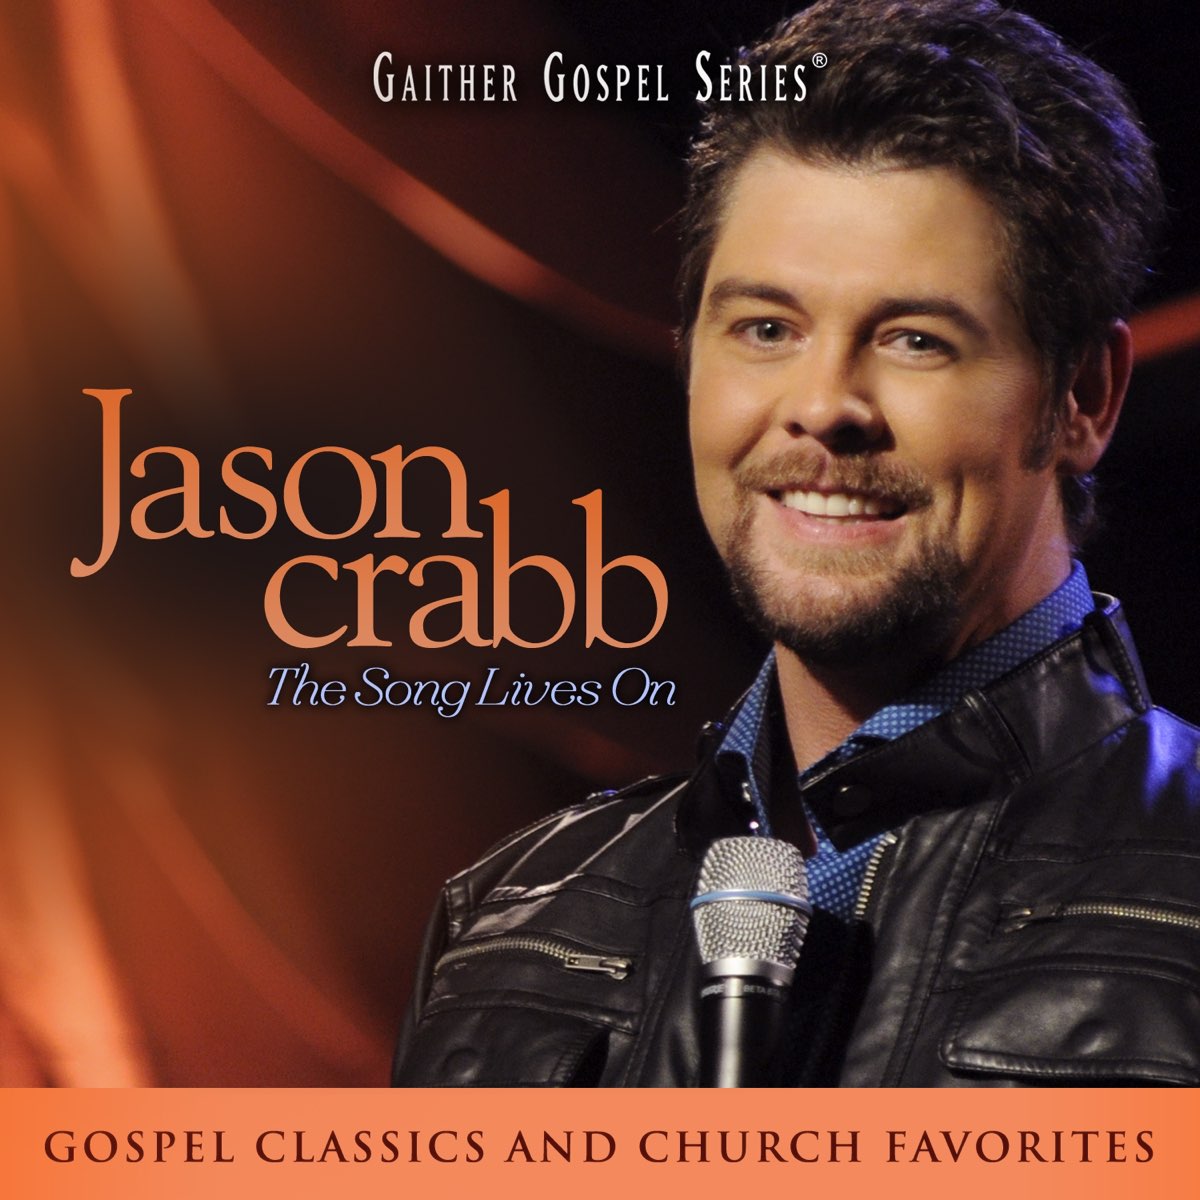 ‎The Song Lives On by Jason Crabb on Apple Music